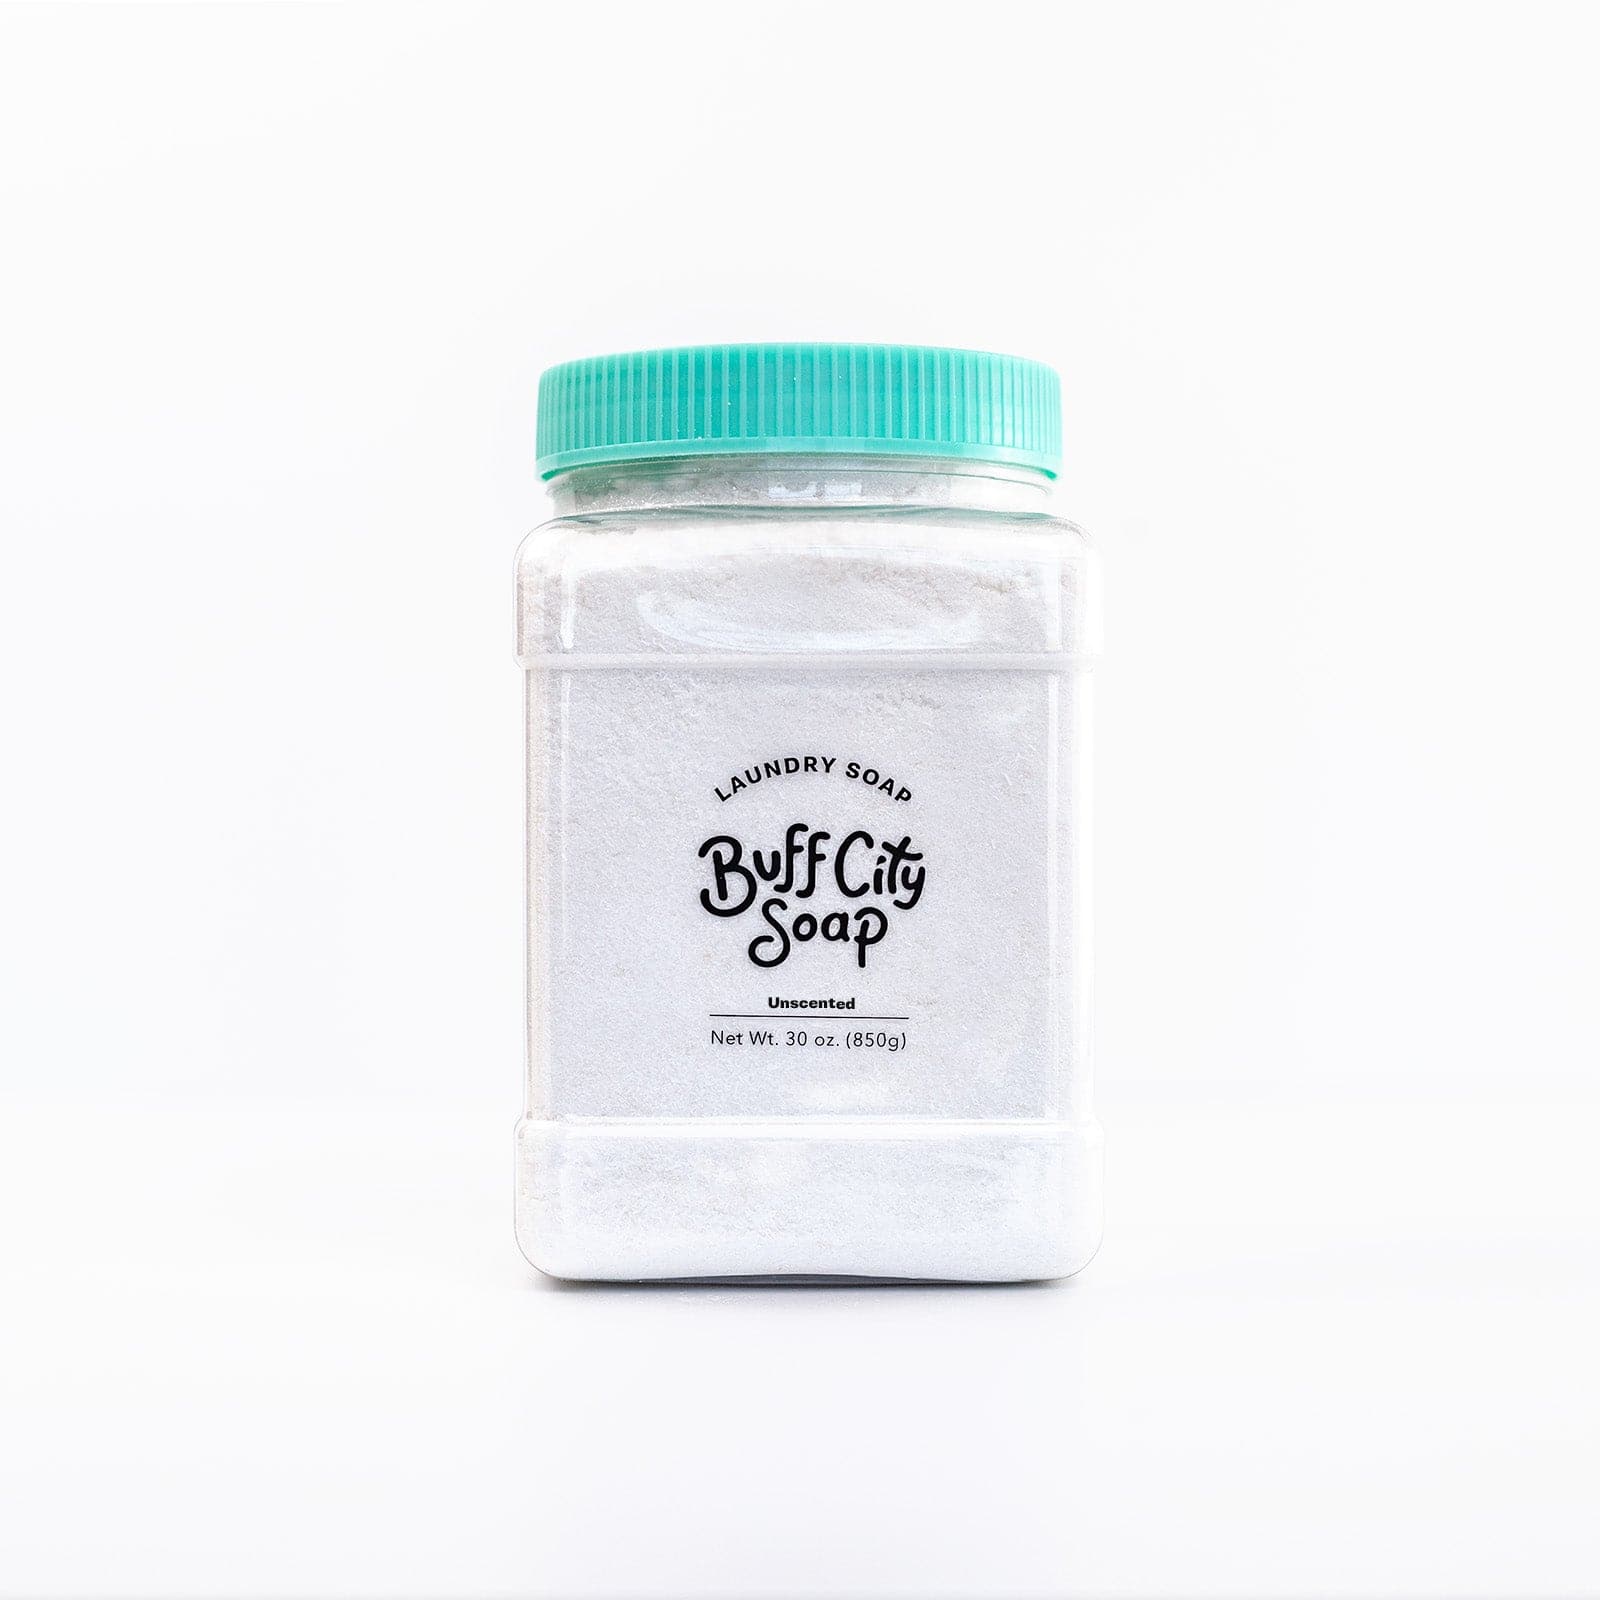 Unscented Laundry Soap with teal lid against white background